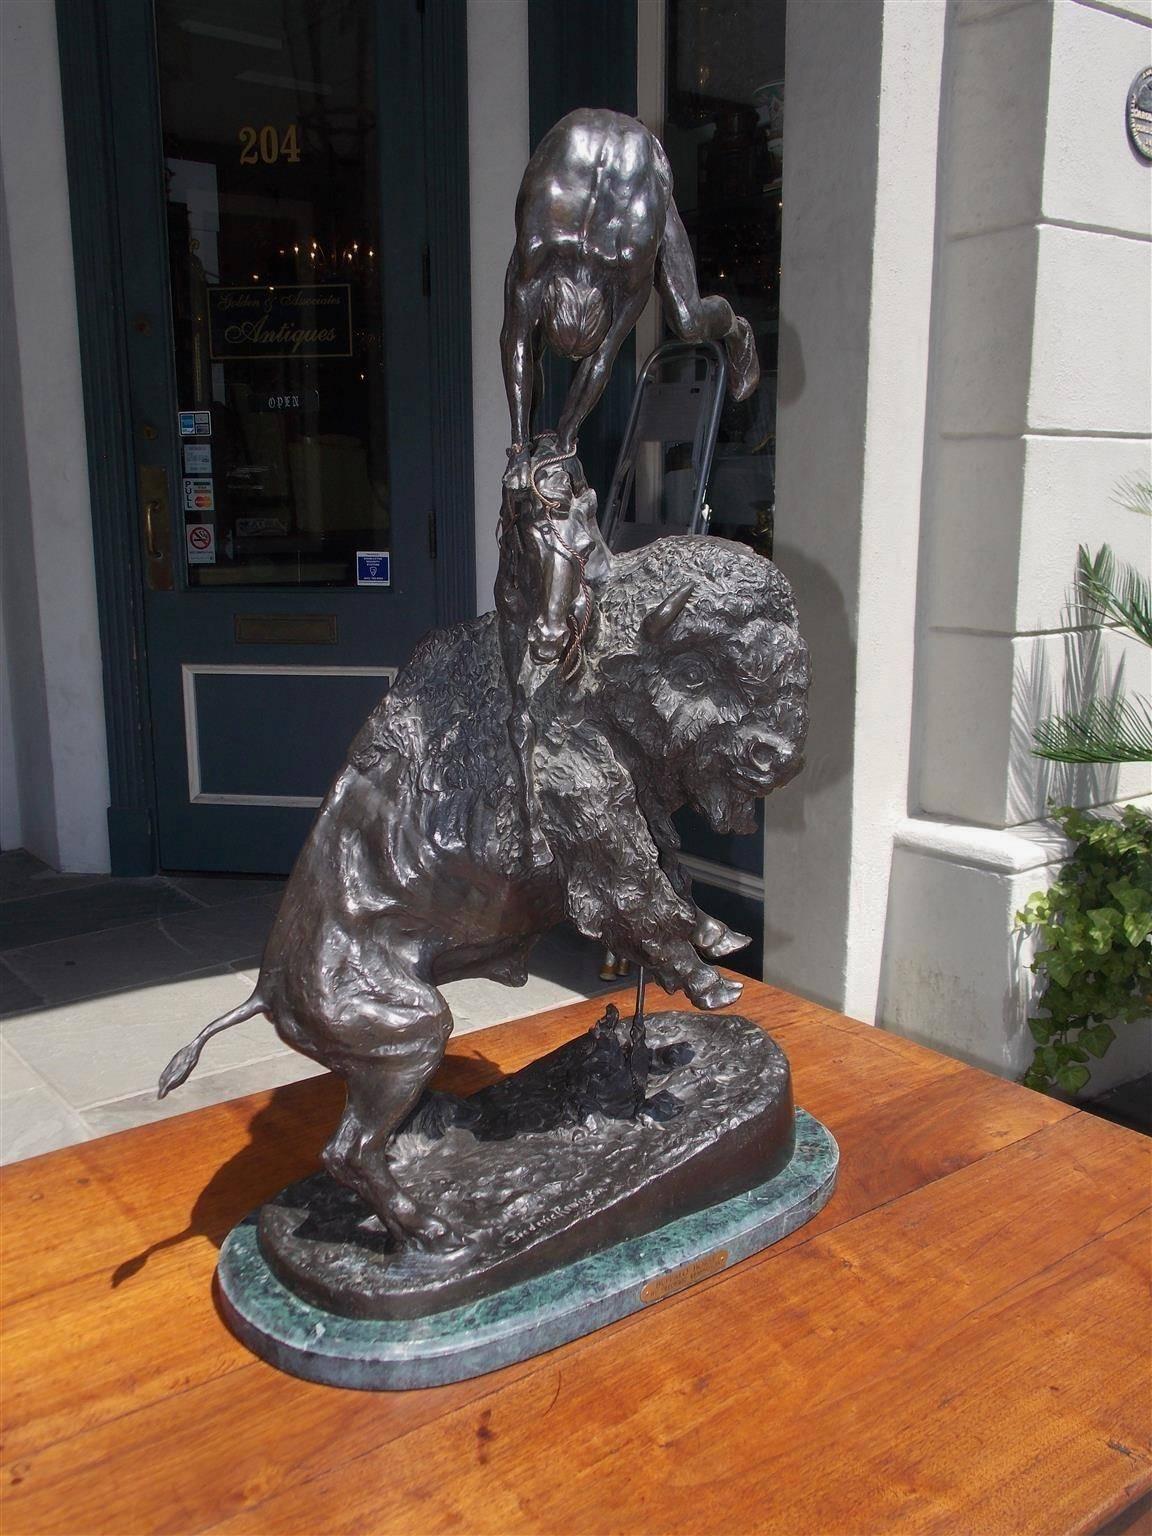 American Re-strike bronze sculpture of Buffalo horse resting on an oval Italian marble base. A native American hunter is depicted attempting to overpower and take down a powerful buffalo. The buffalo comes up under the horse and throws the hunter up